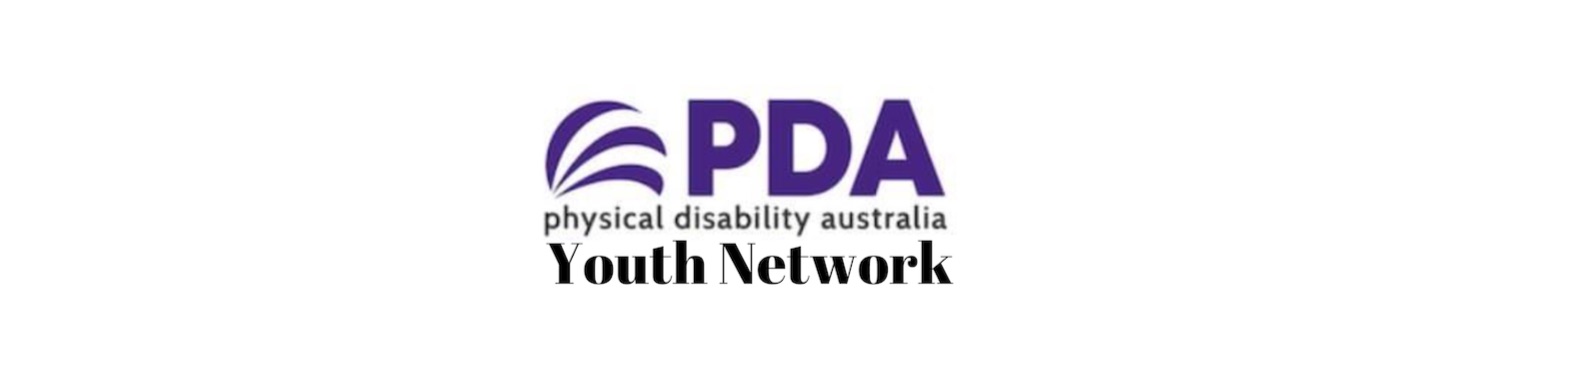 PDA Youth Alliance is now PDA Youth Network